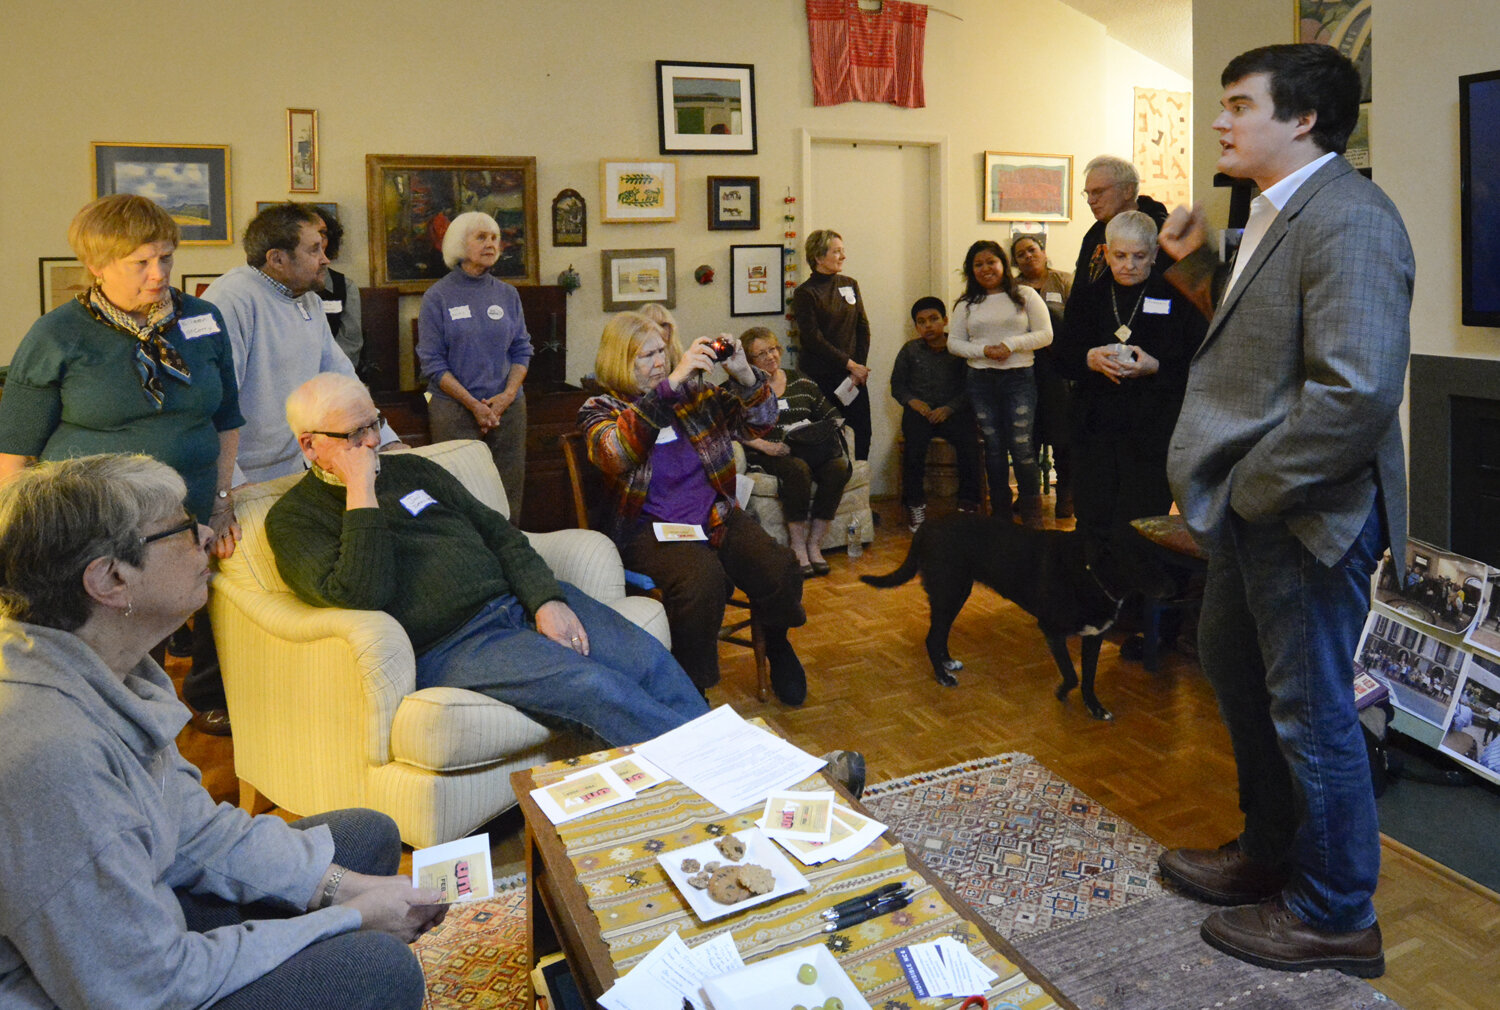  January 28, 2018 Indivisible Meet the Candidate Event Pittsboro, NC   